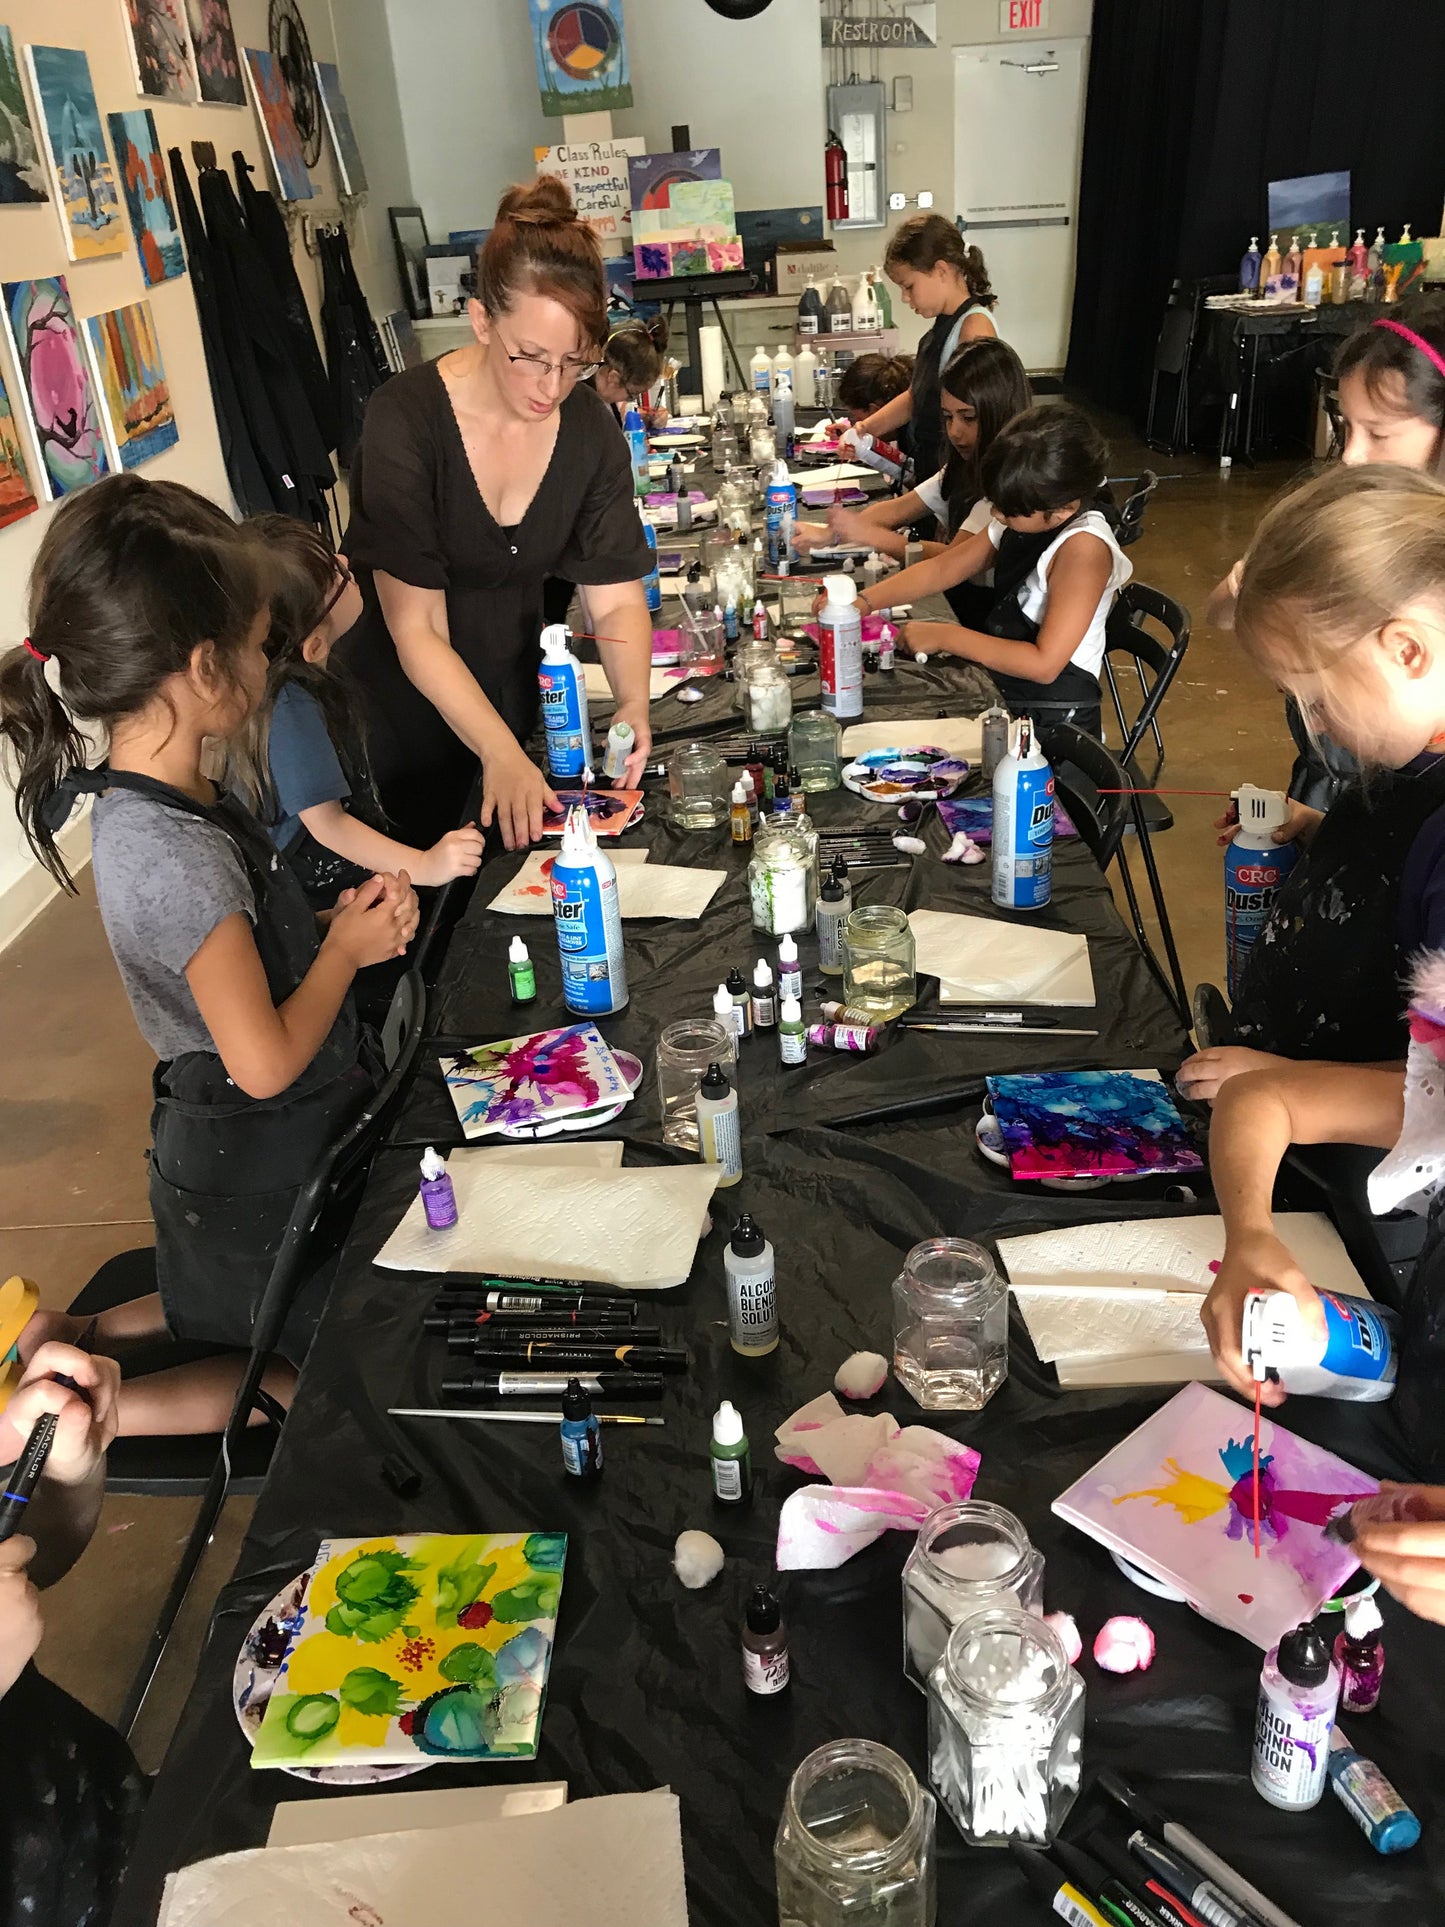 Sat, Mar 25th, 2-4P “Alcohol Inks” Private Kids Painting Party